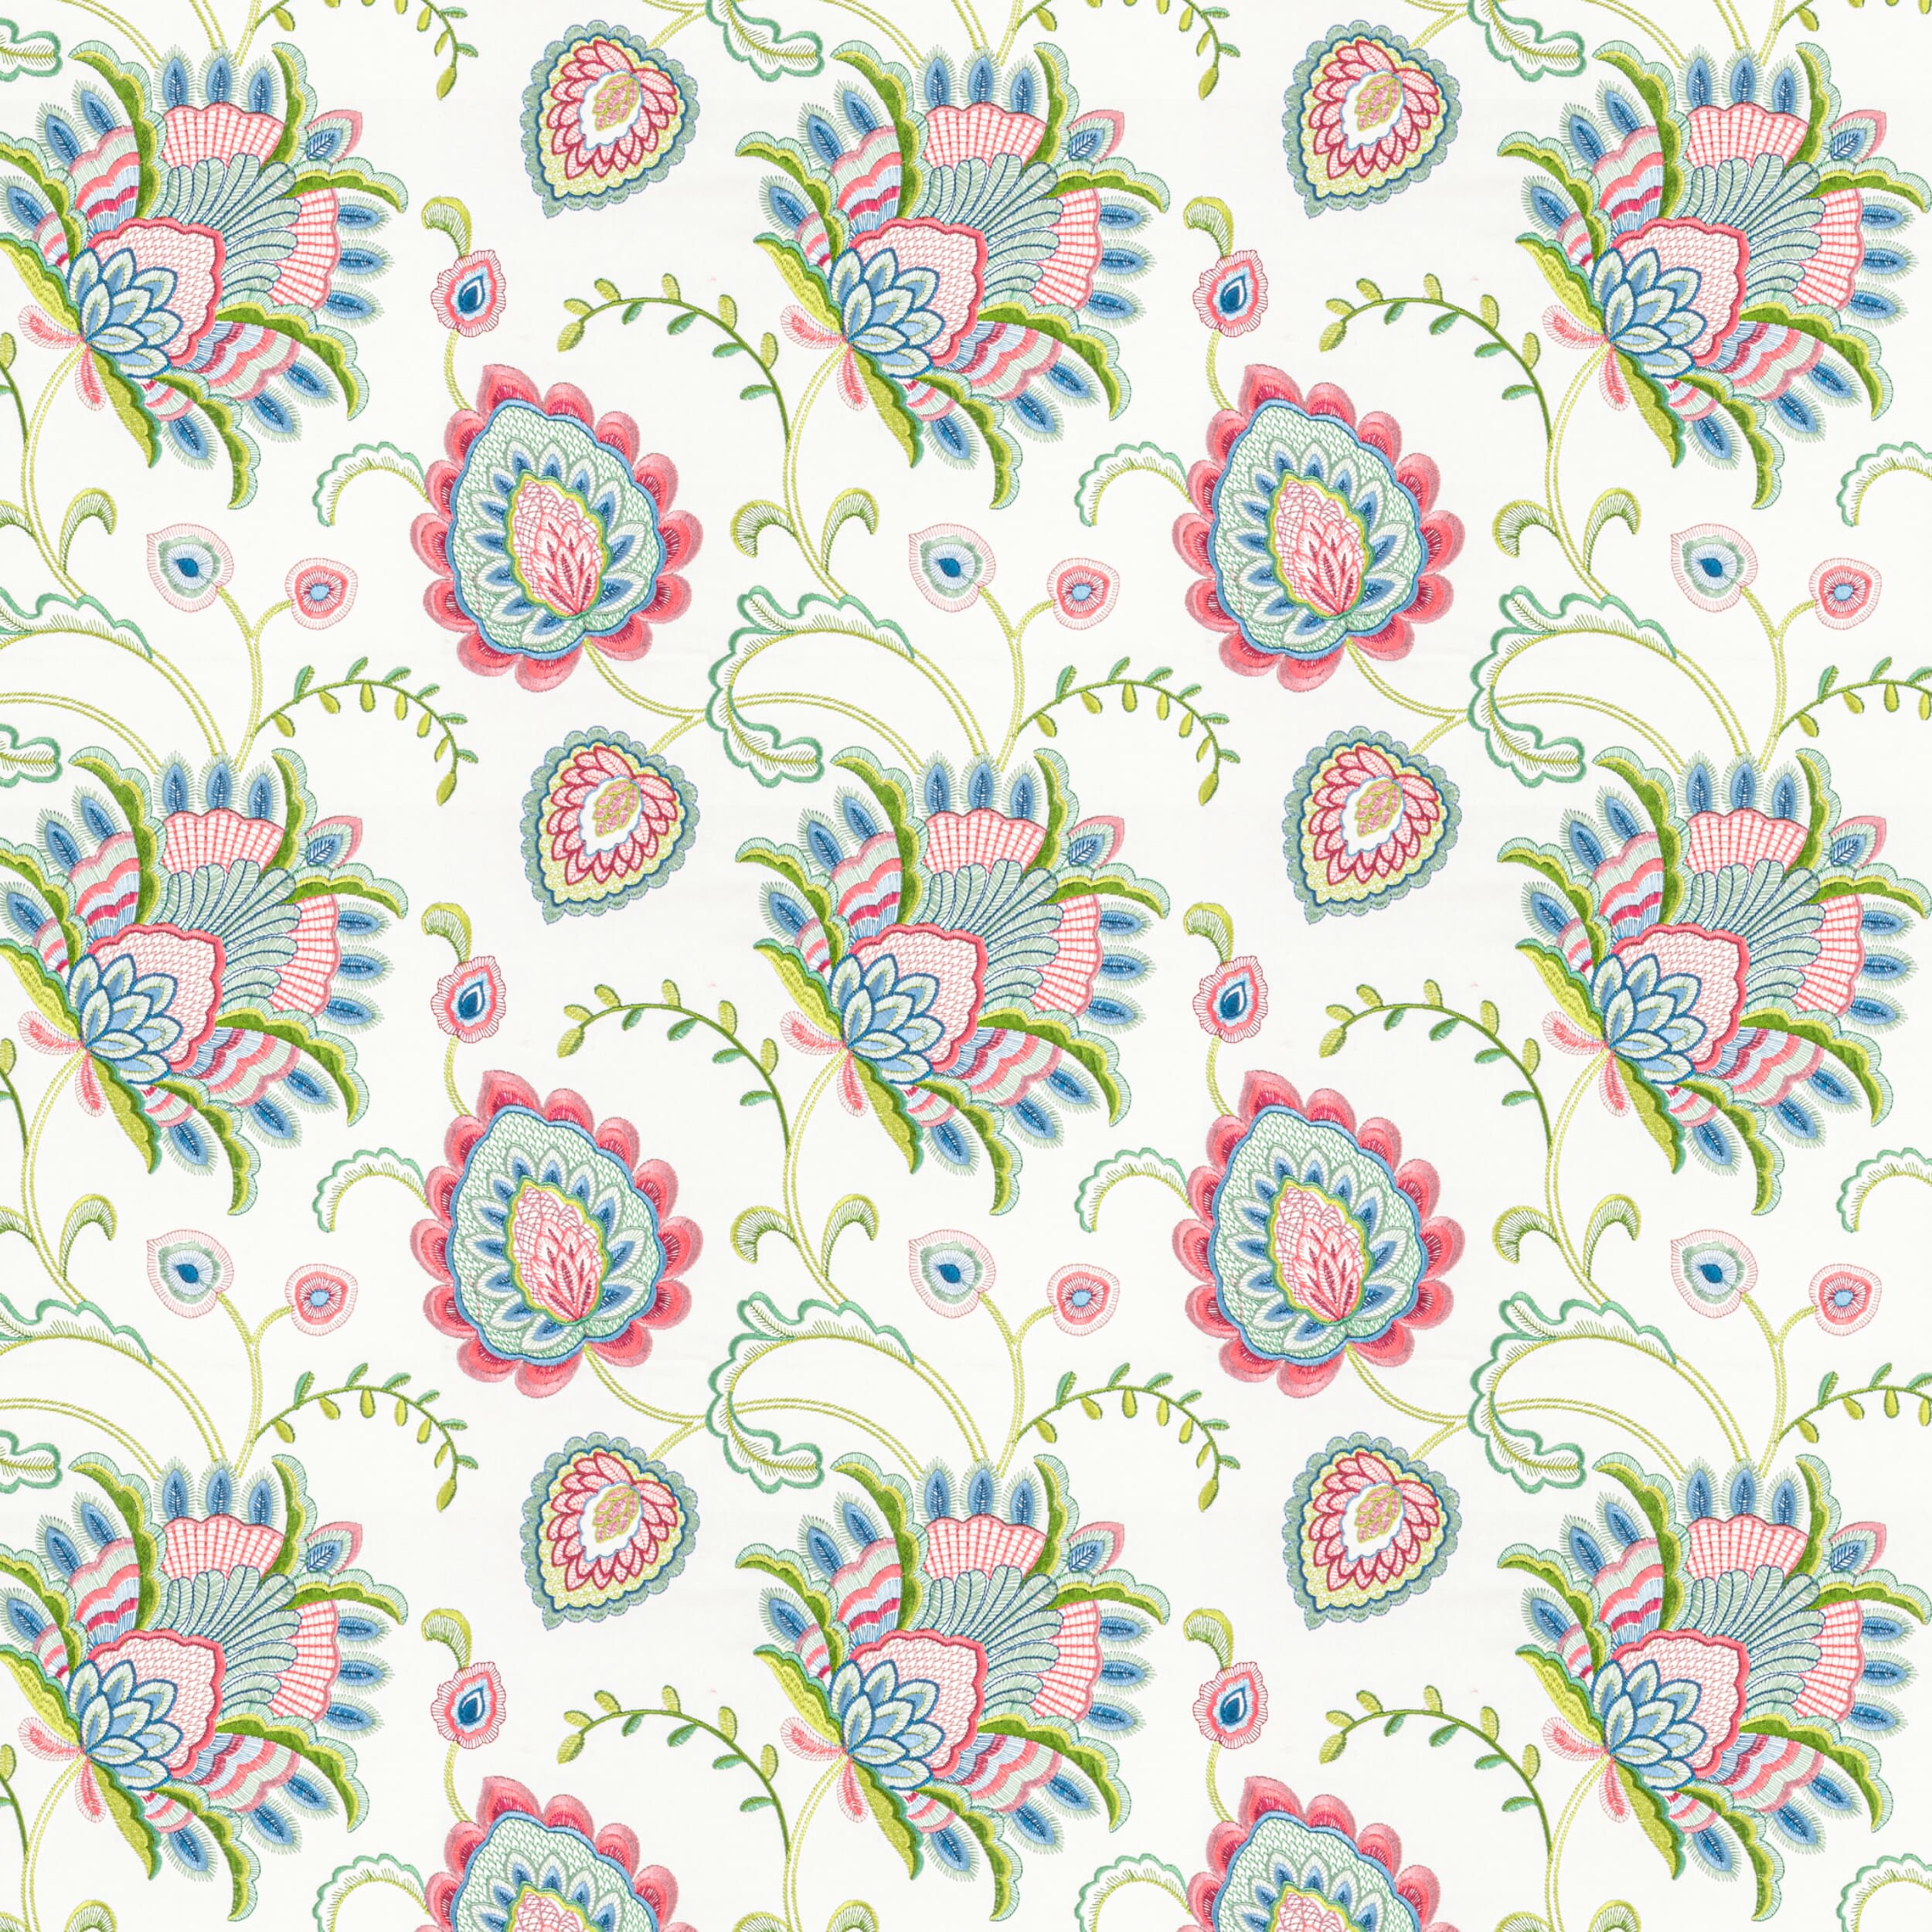 Julep 1 Blossom by Stout Fabric